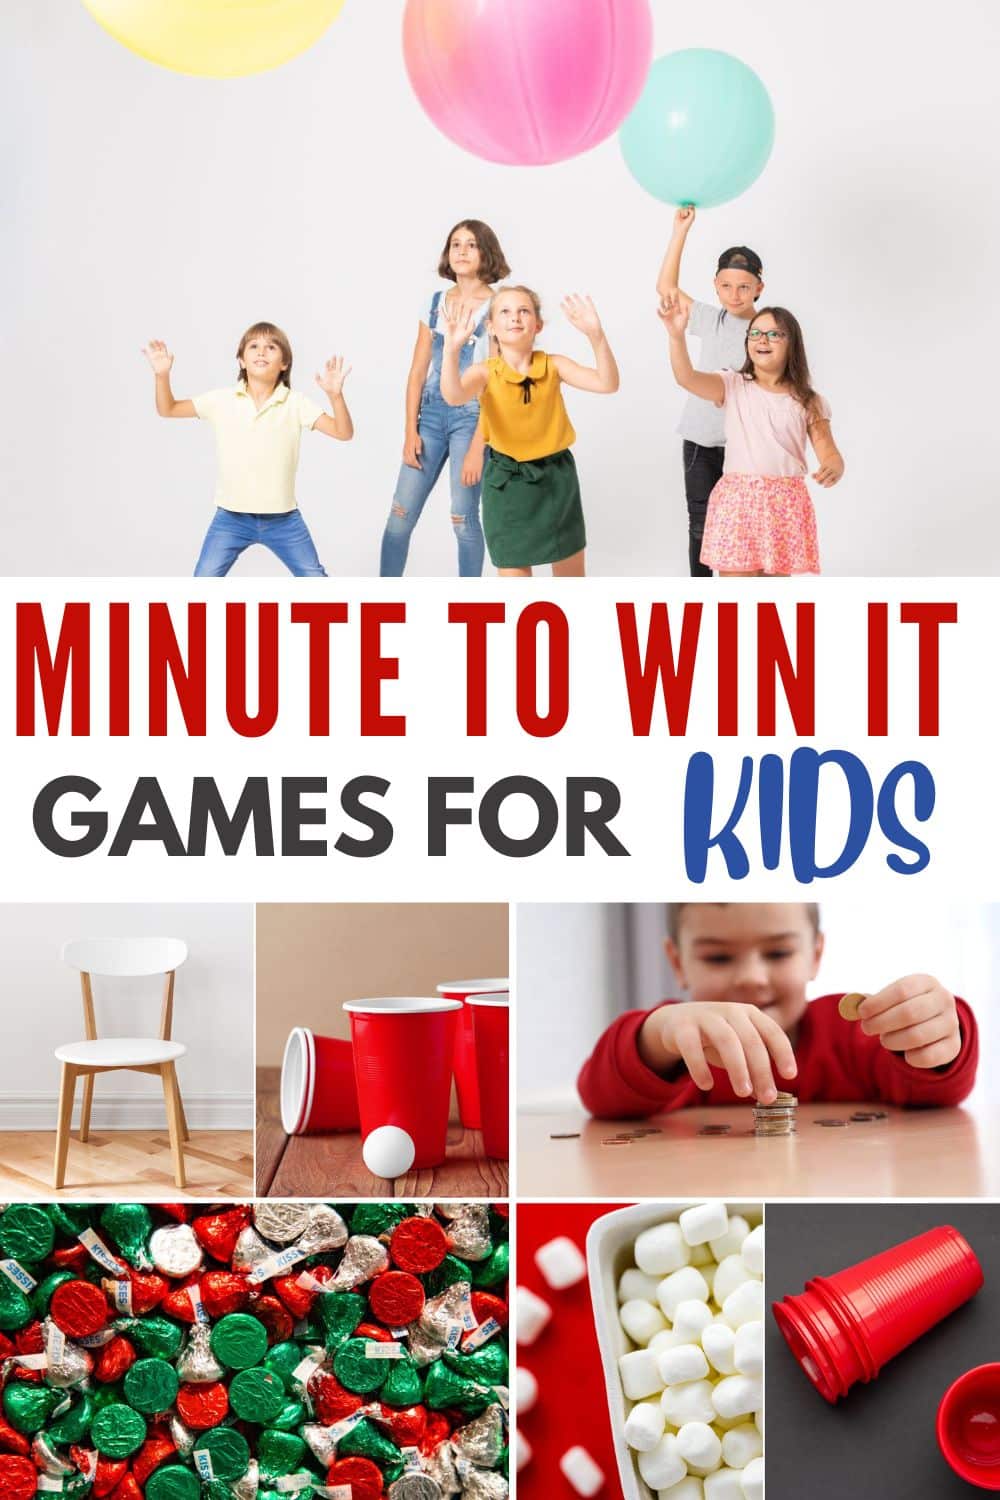 Minute to win it games for kids are incredibly fun and exciting. These games encourage friendly competition and challenge children to complete them in under a minute. With a wide variety of minute to win it games for